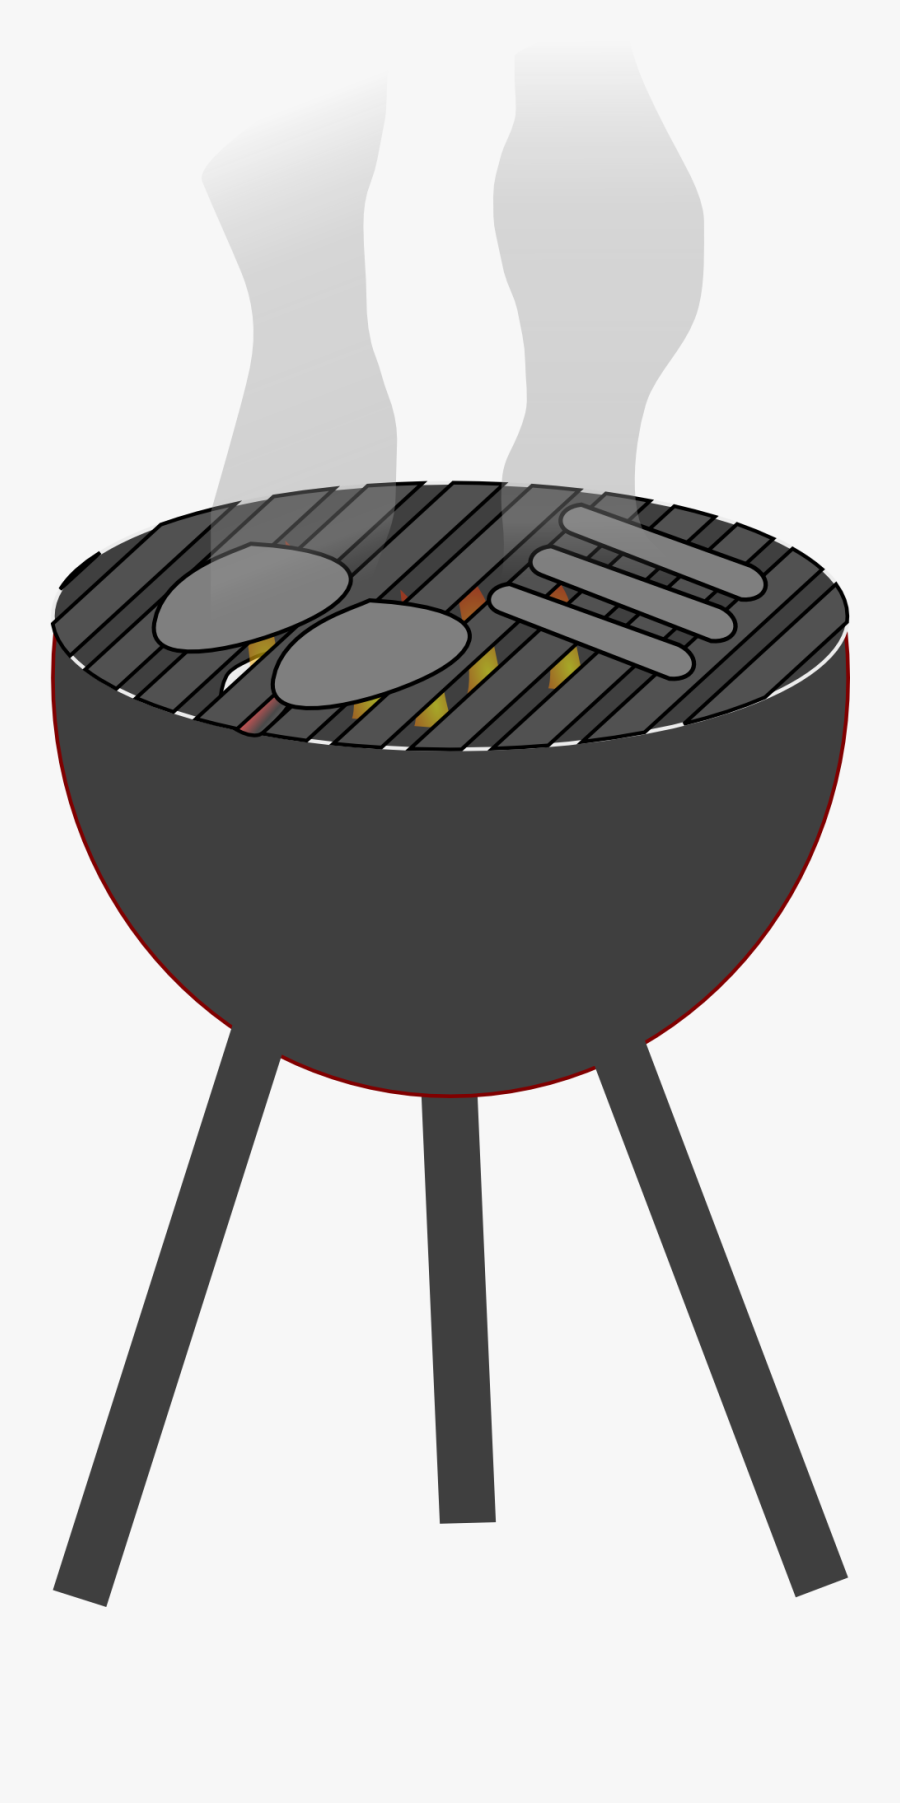 Barbecue Image Png, Transparent Clipart